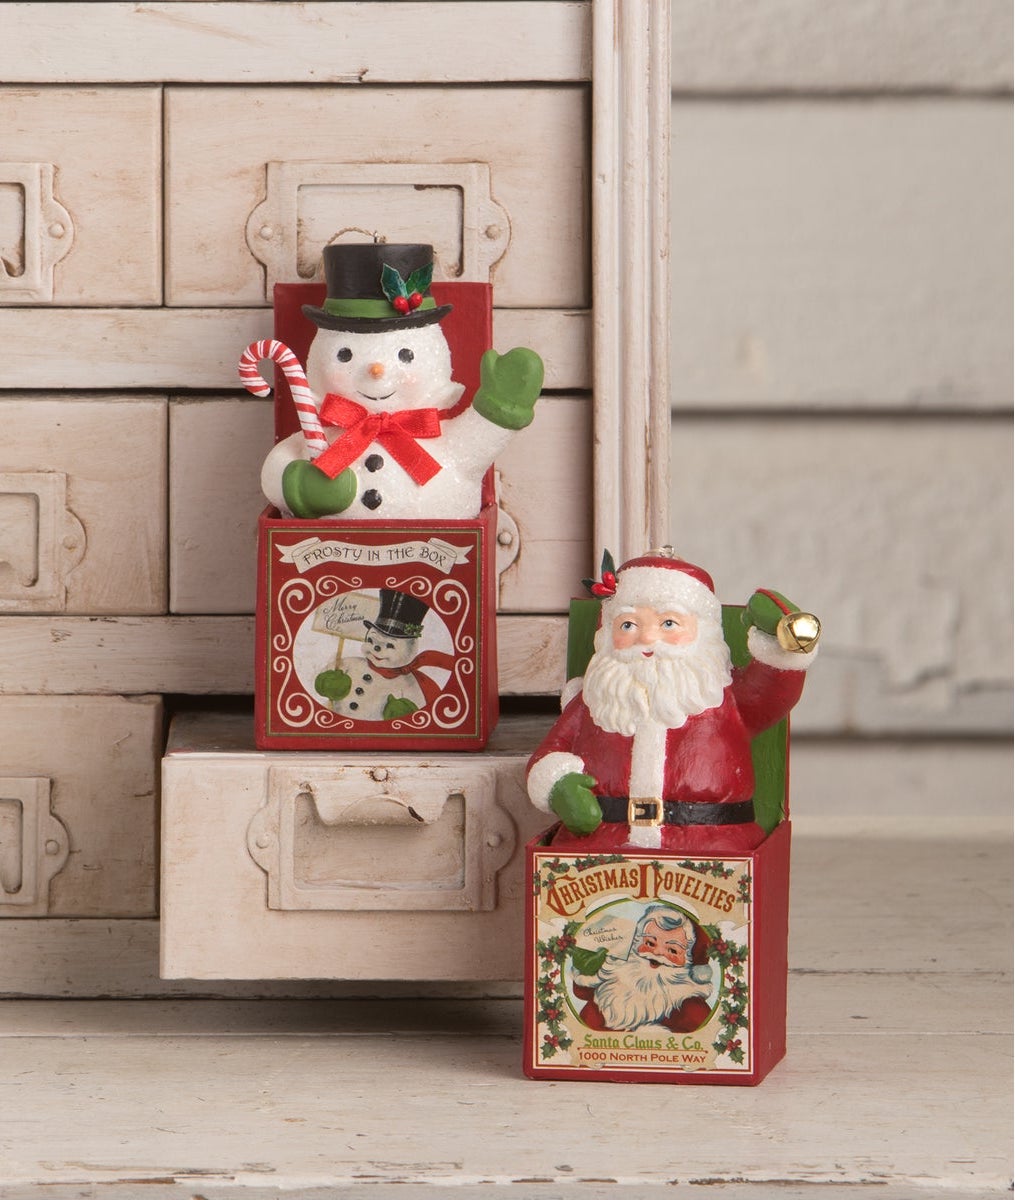 Vintage Style Christmas Ornaments, Santa in the Box and Snowman in the Box Ornaments